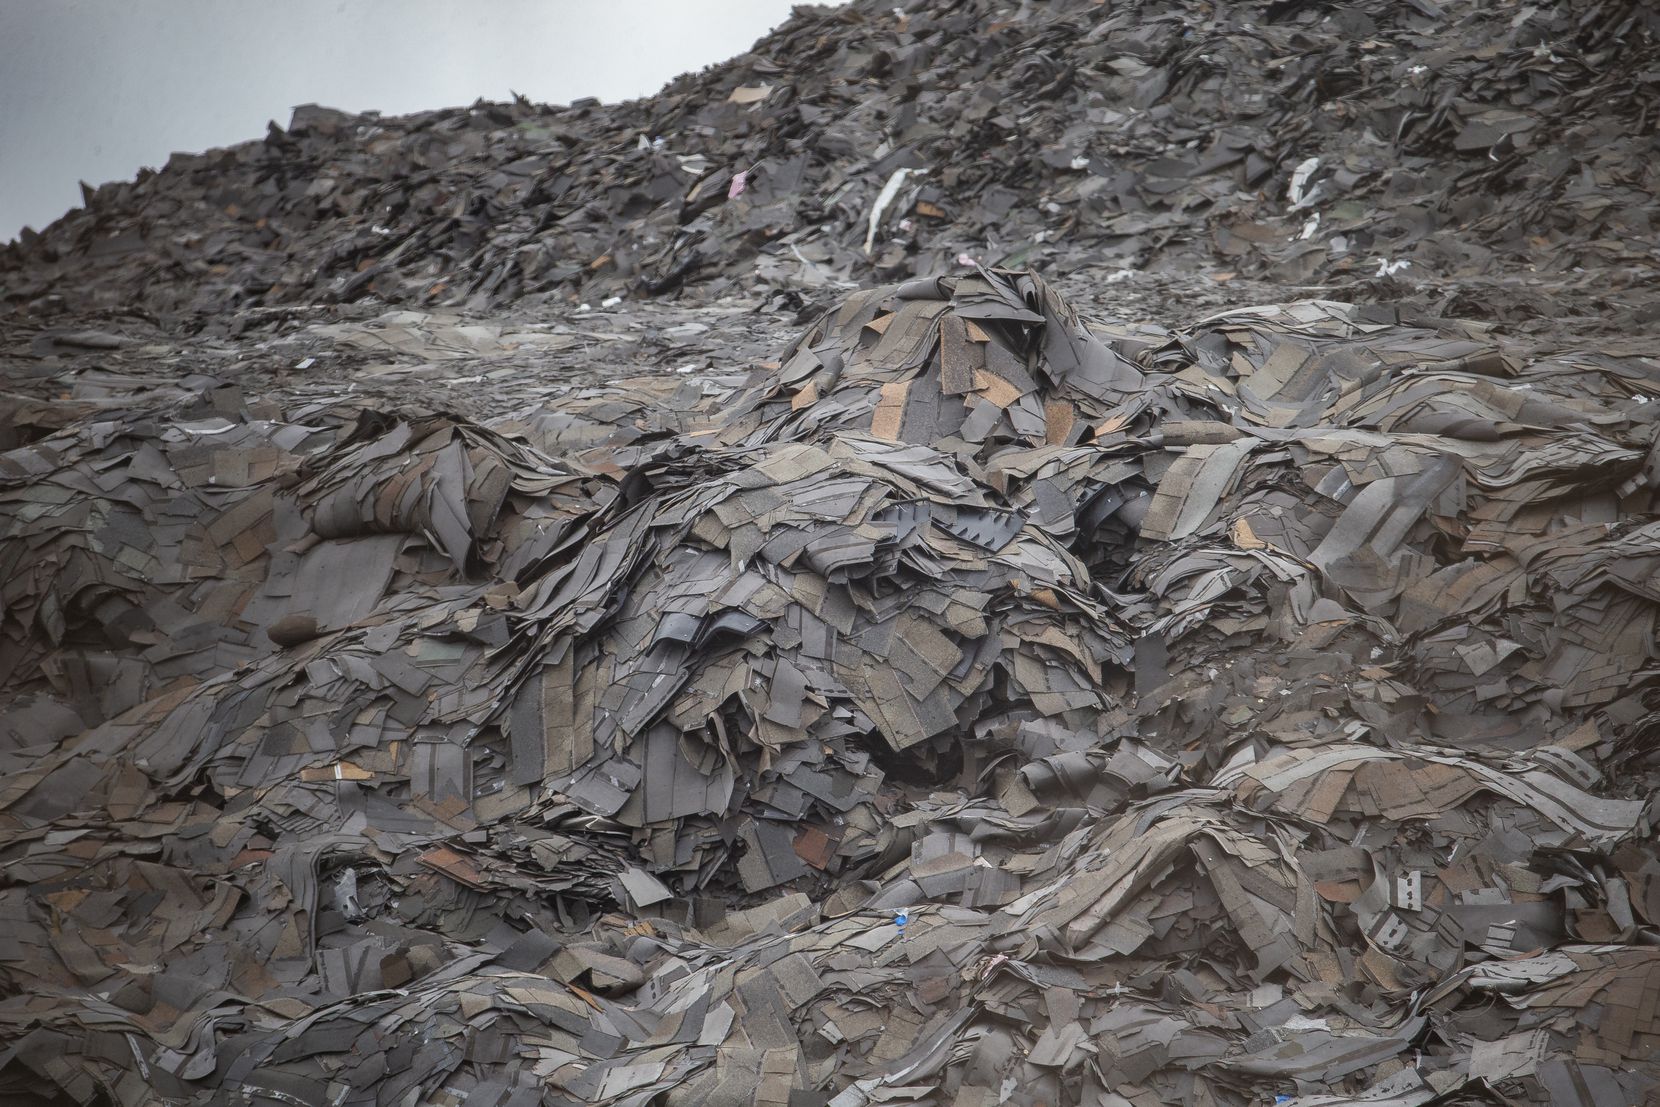 A closeup of the mountain of roofing shingles at what remains of Blue Star Recycling off South Central Expressway in southern Dallas, not too far from Paul Quinn College